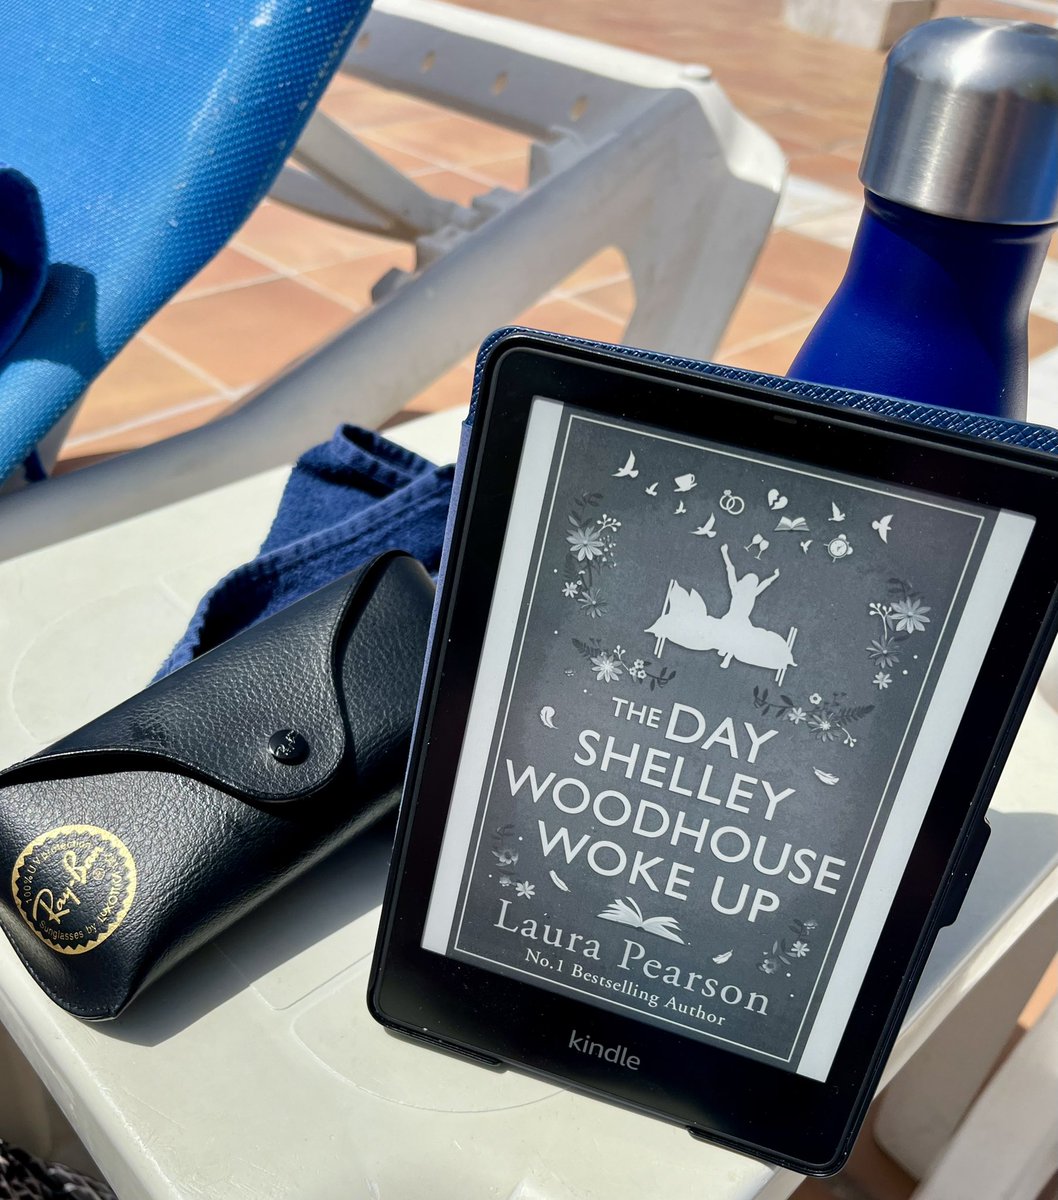 Happy publication day @LauraPAuthor ! This holiday read was thought provoking and touching !! #thedayshelleywoodhousewokeup #newfiction #booksonholiday 

instagram.com/p/C5aj-ferNsV/…